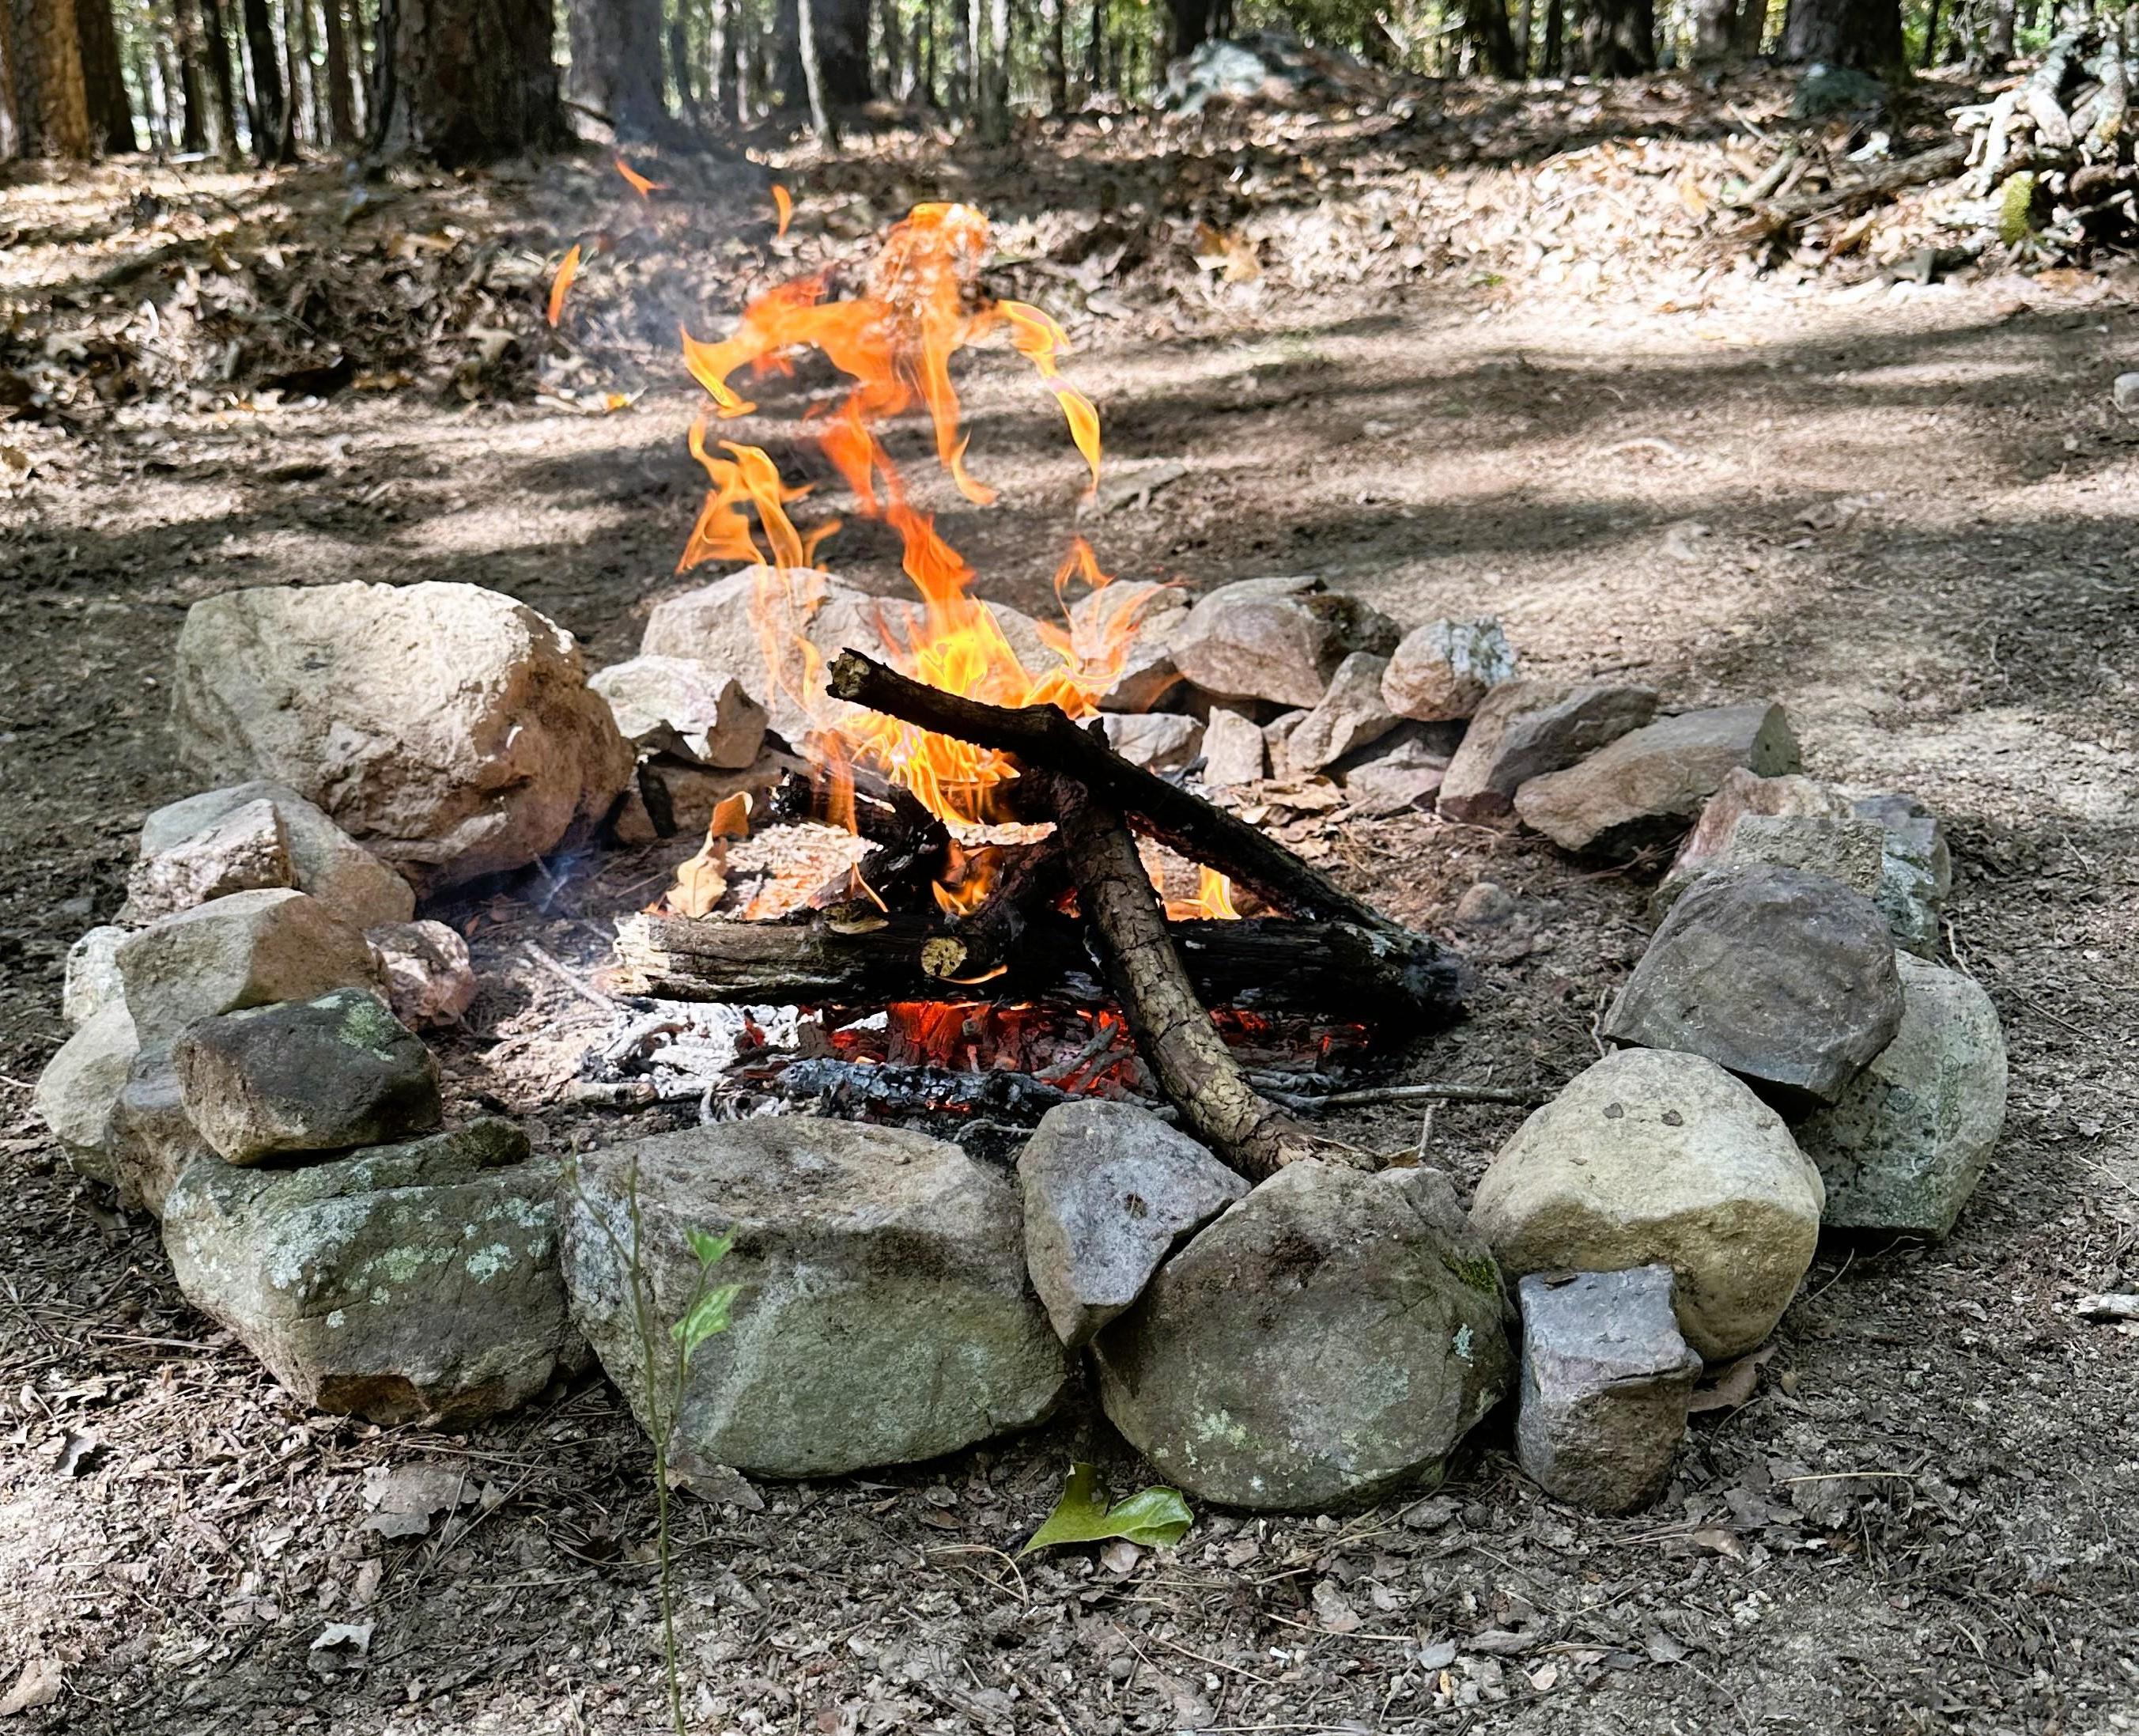 How to Build a Campfire Safely